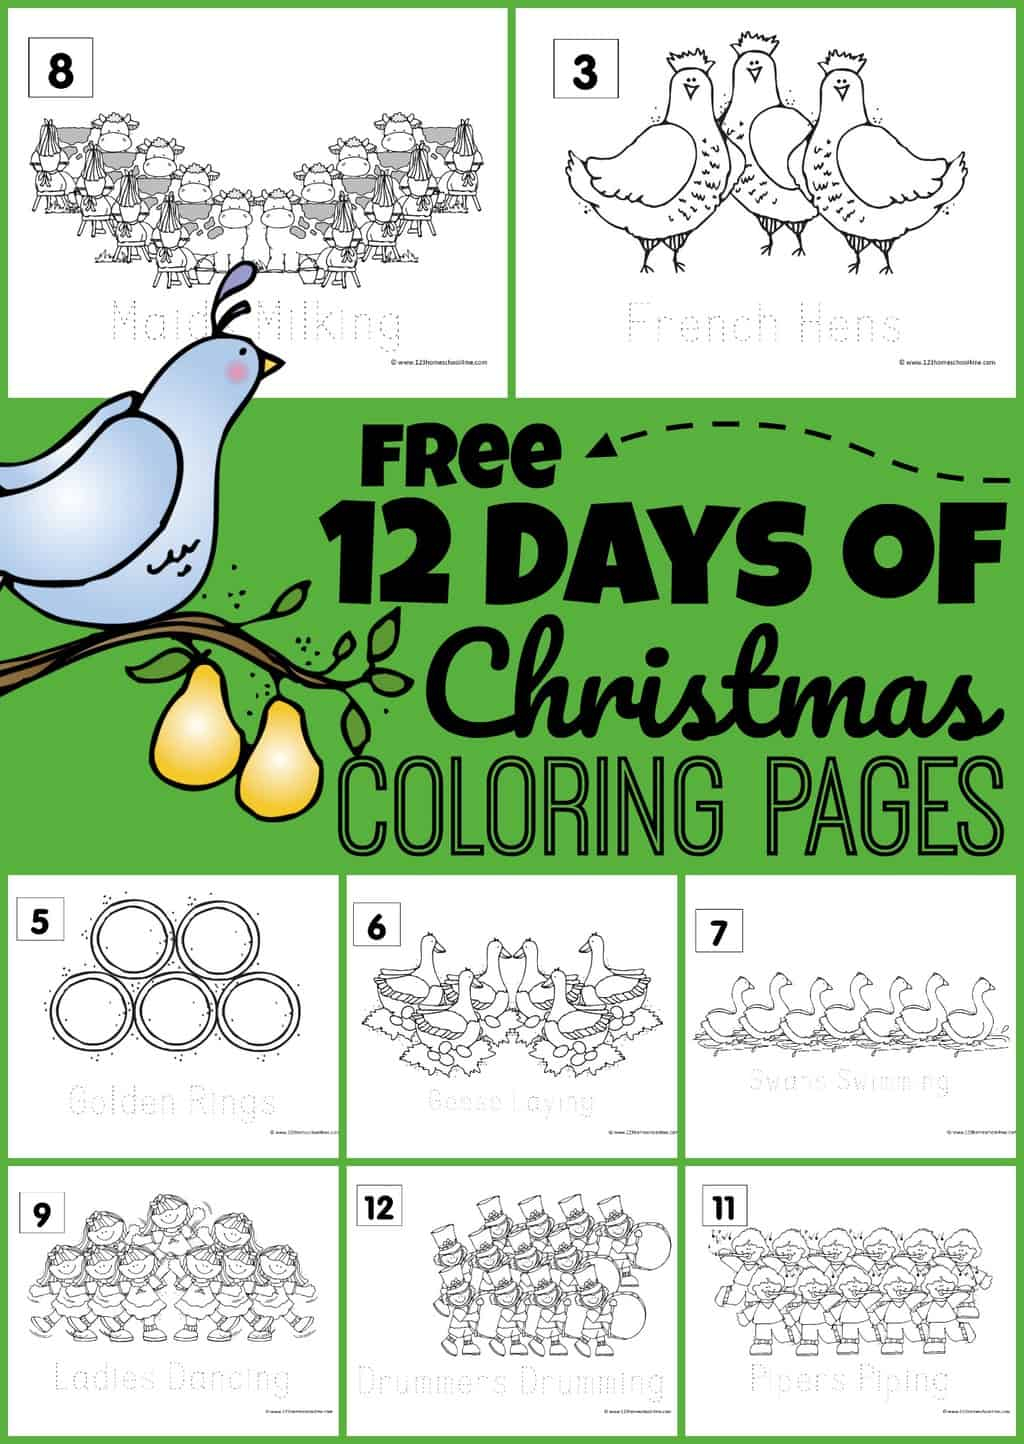 Free 12 Days Of Christmas Coloring Pages